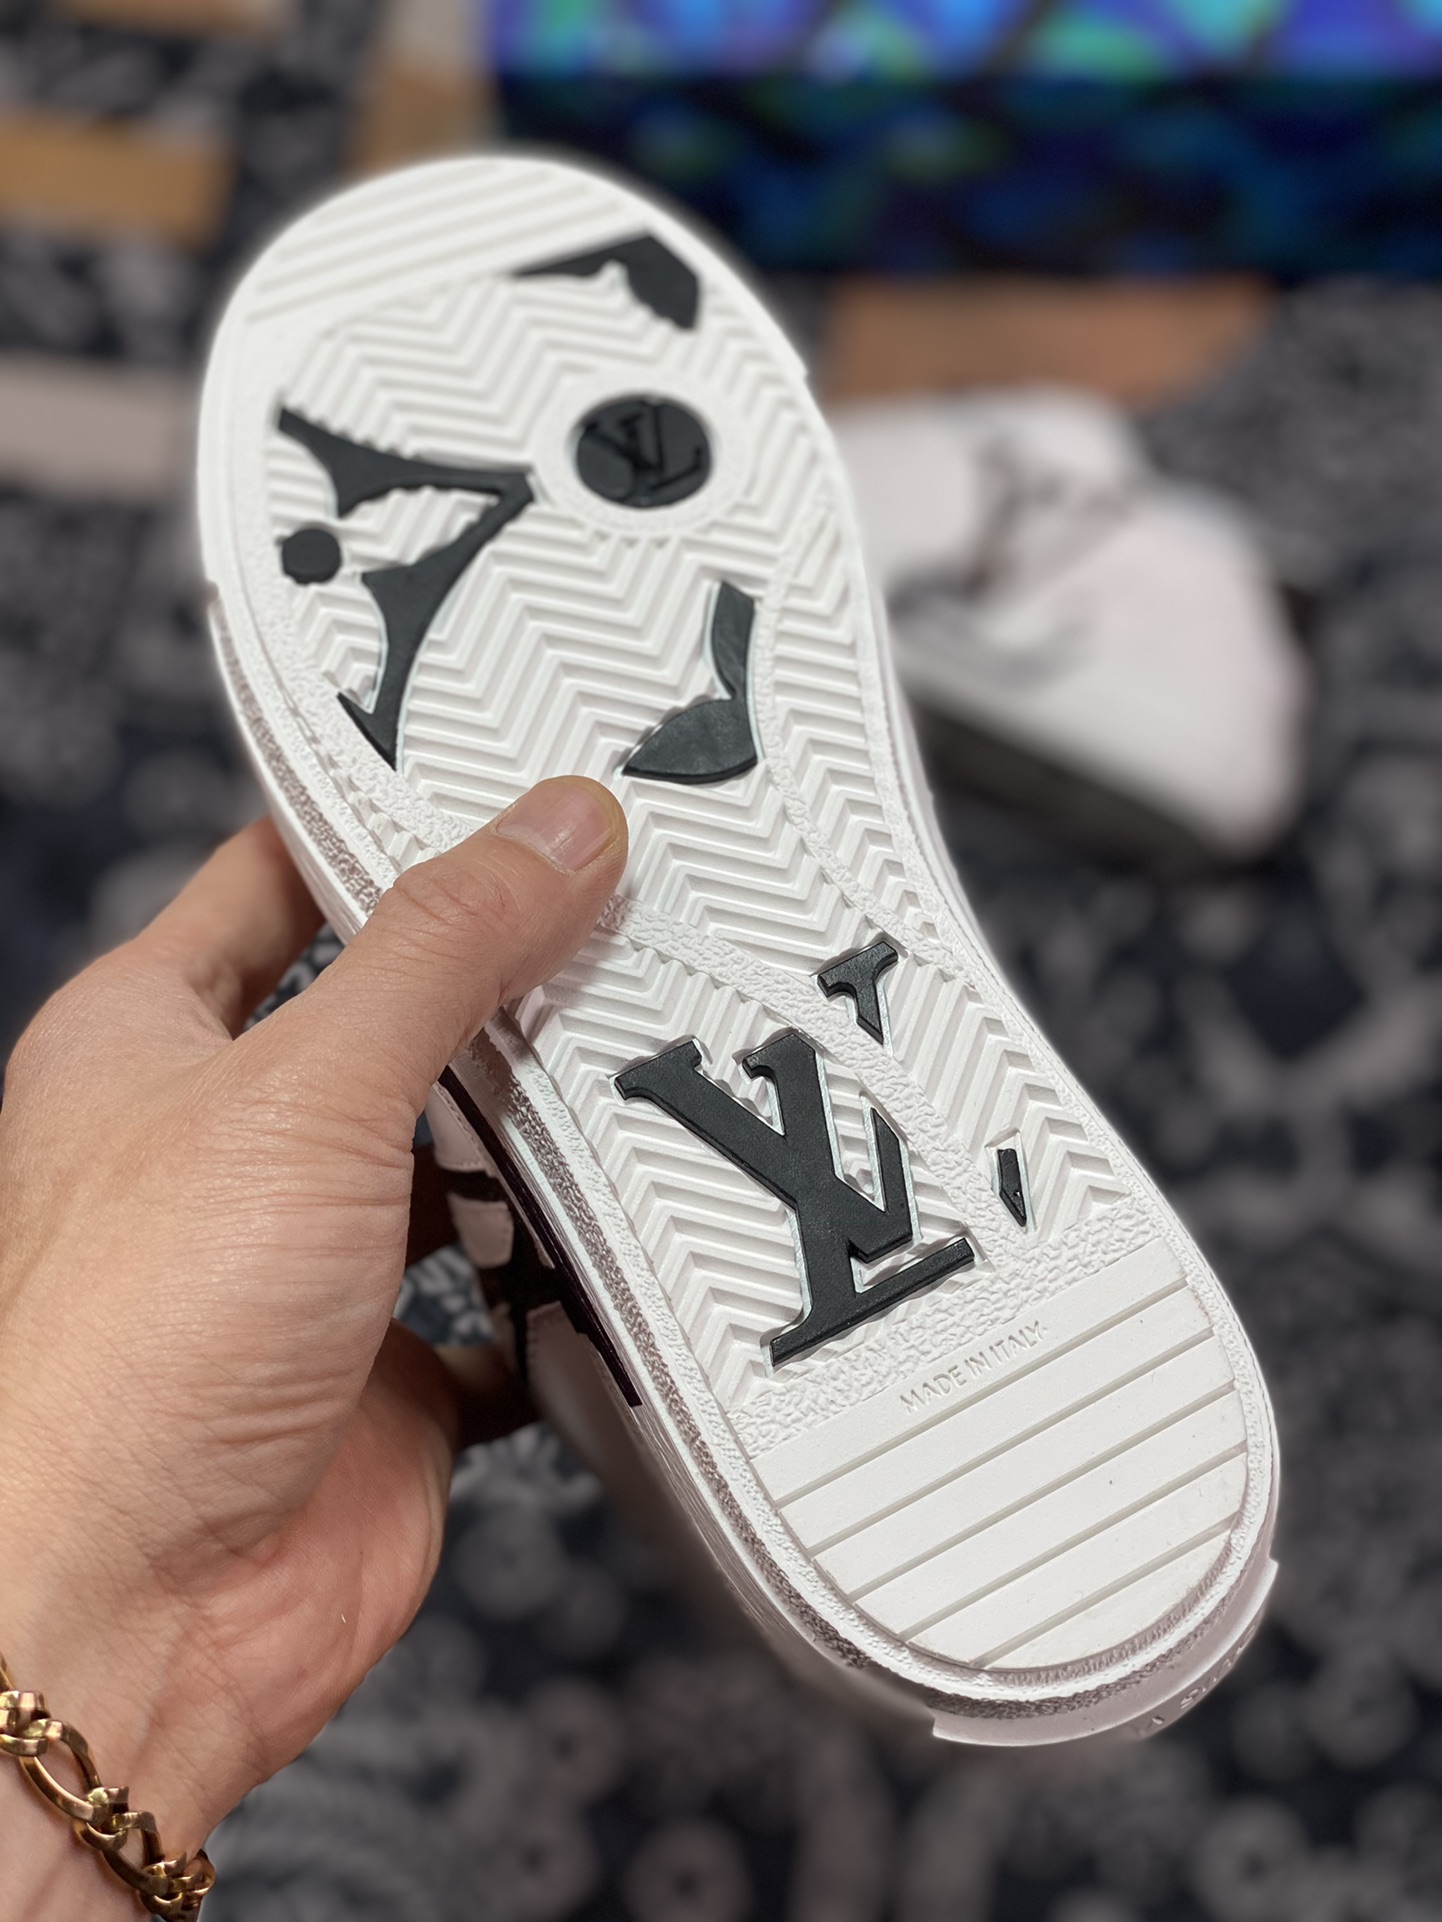 LV has shipped high-end customized shoe uppers imported from Italy with diamond pattern calfskin and nappa pattern calfskin